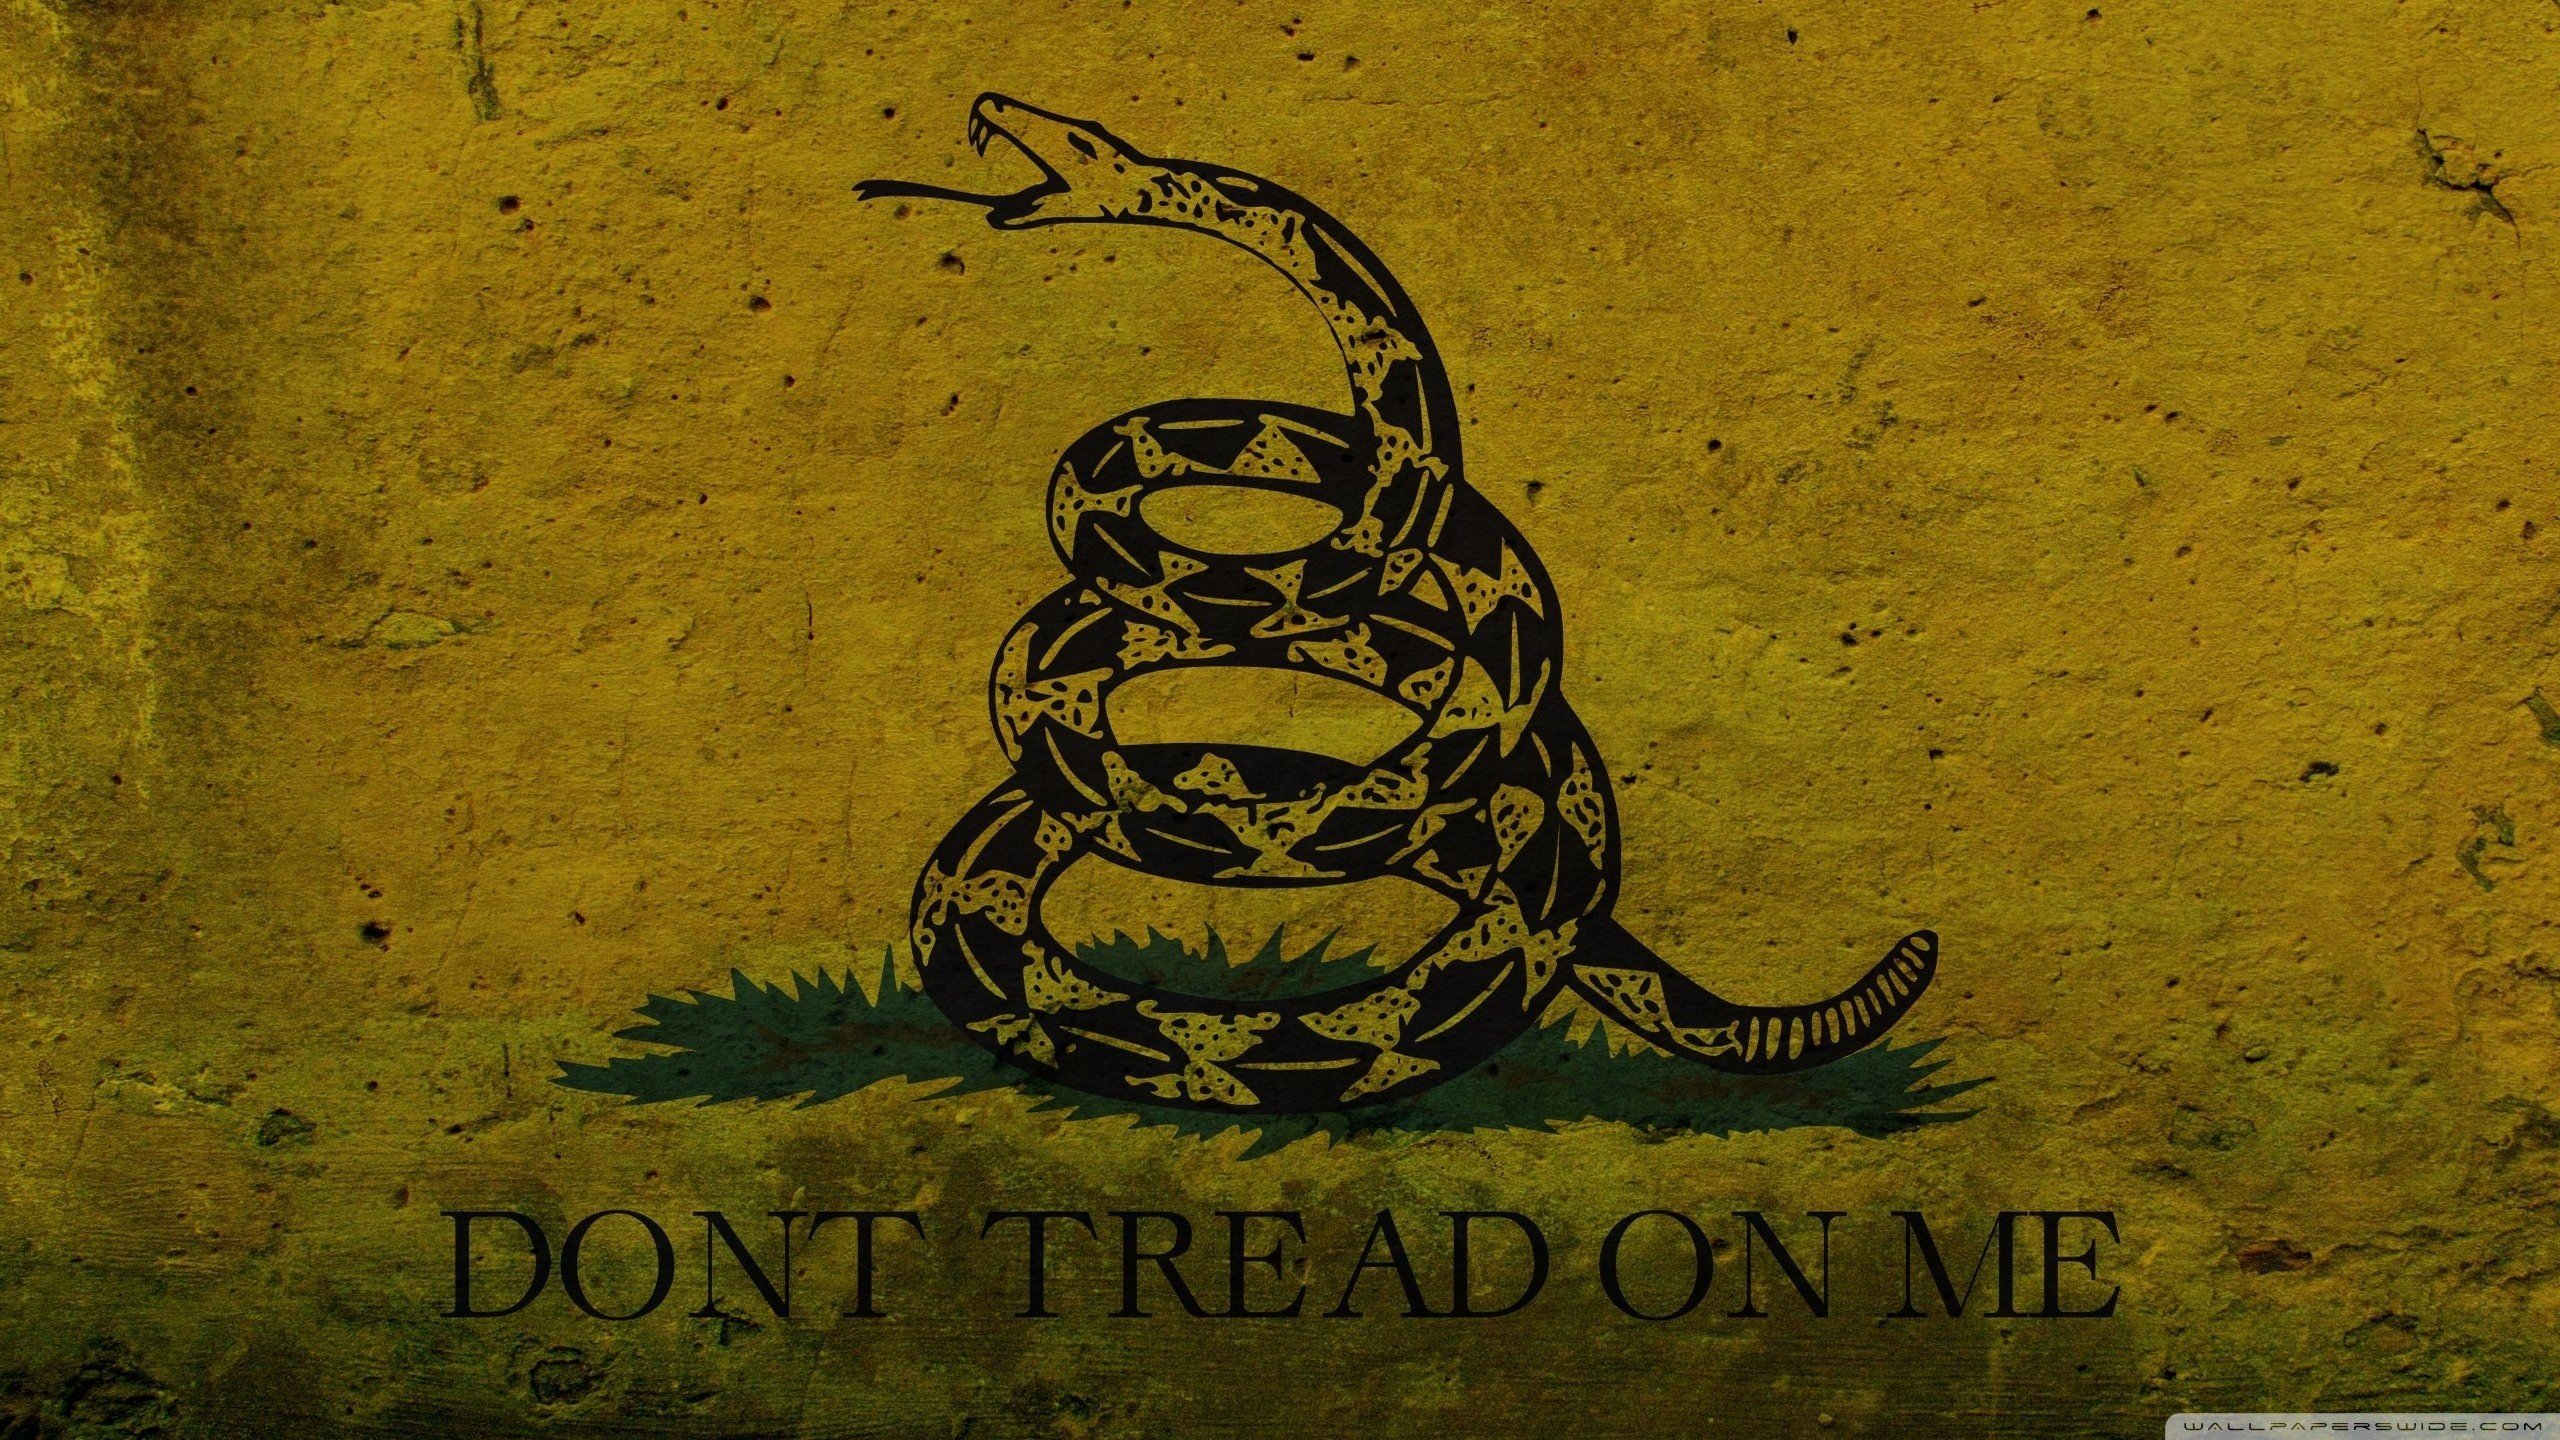 Gadsden Flag, DONT TREAD ON ME HD Wallpapers / Desktop and Mobile